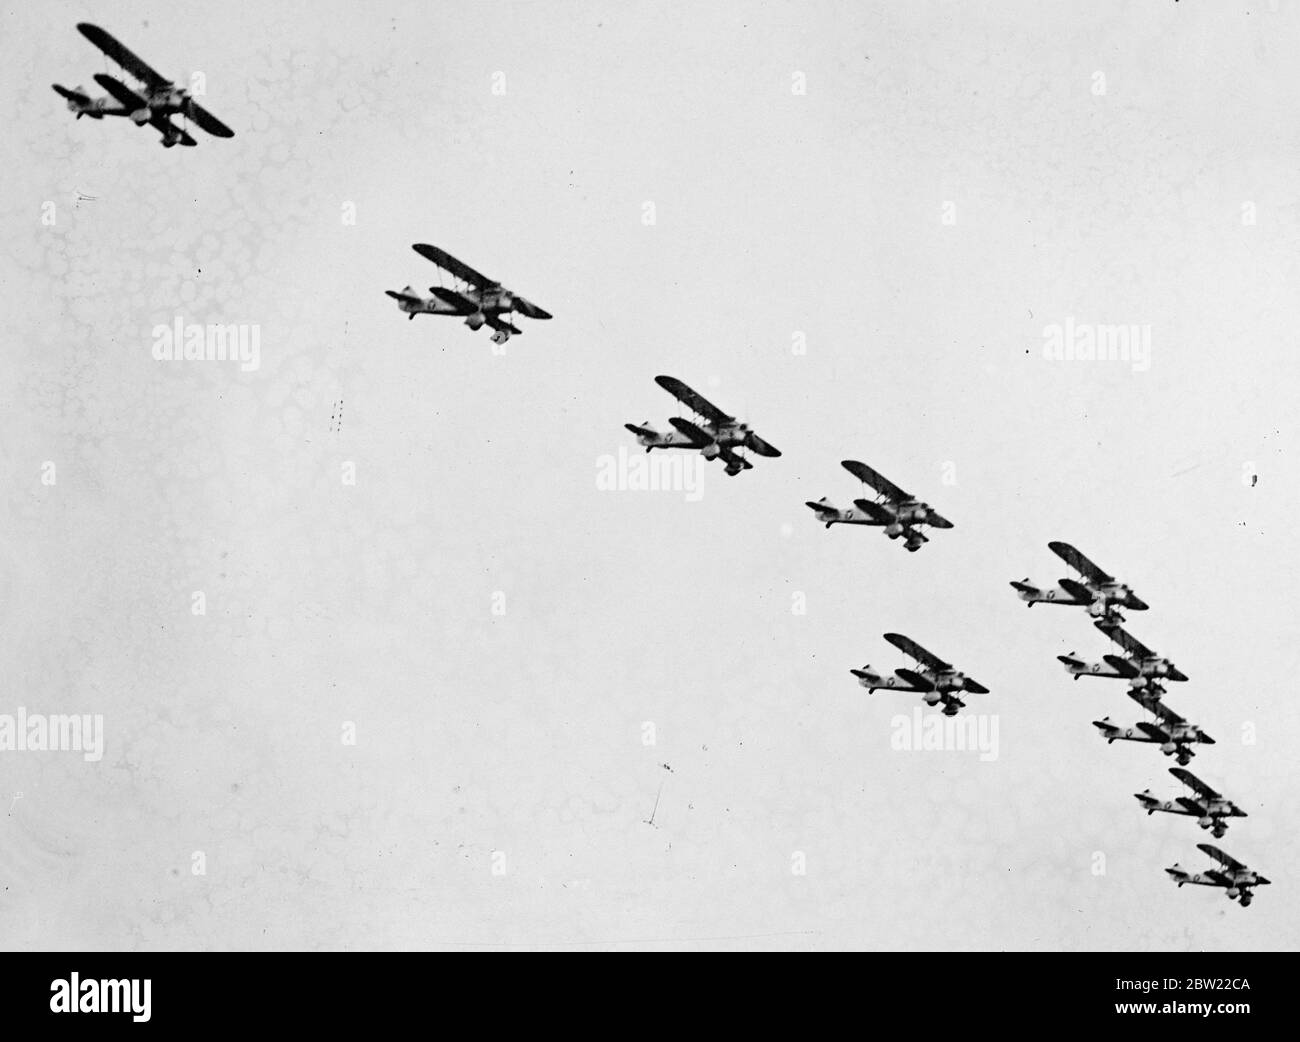 Austria reveals her secret air force. New warplanes saw over at Vienna. Vienna watched with surprised when Austria's new air force appeared in public for the first time at Aspern airfield, and dark grey monoplane bombers and swift fighters soared and dived over the heads of large crowds. The new air force is still illegal under the end of war St Germain Treaty. It has been built in the last two years. It is understood that Austria has 300 military machines, between 30 and 40, of which are bombers. Photo shows, a squadron of Austria's new warplanes Fiat CR.32, flying in formation over the Asper Stock Photo